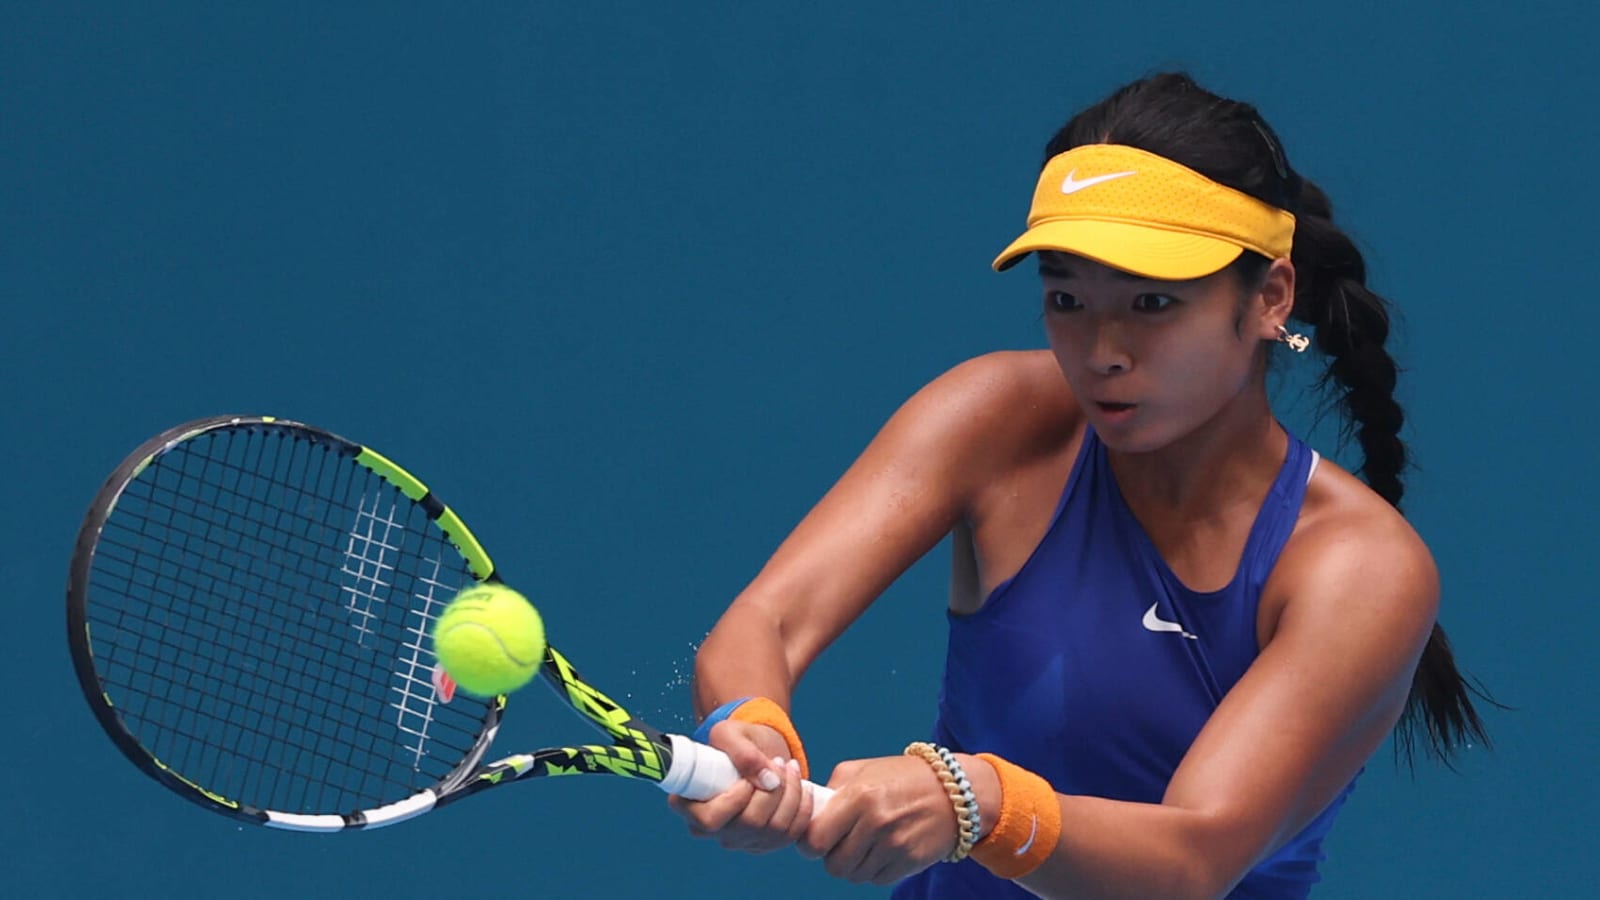 Alex Eala rubs in Filipino pride as she strives to become a role model for the young women struggling to make their place on the tennis court